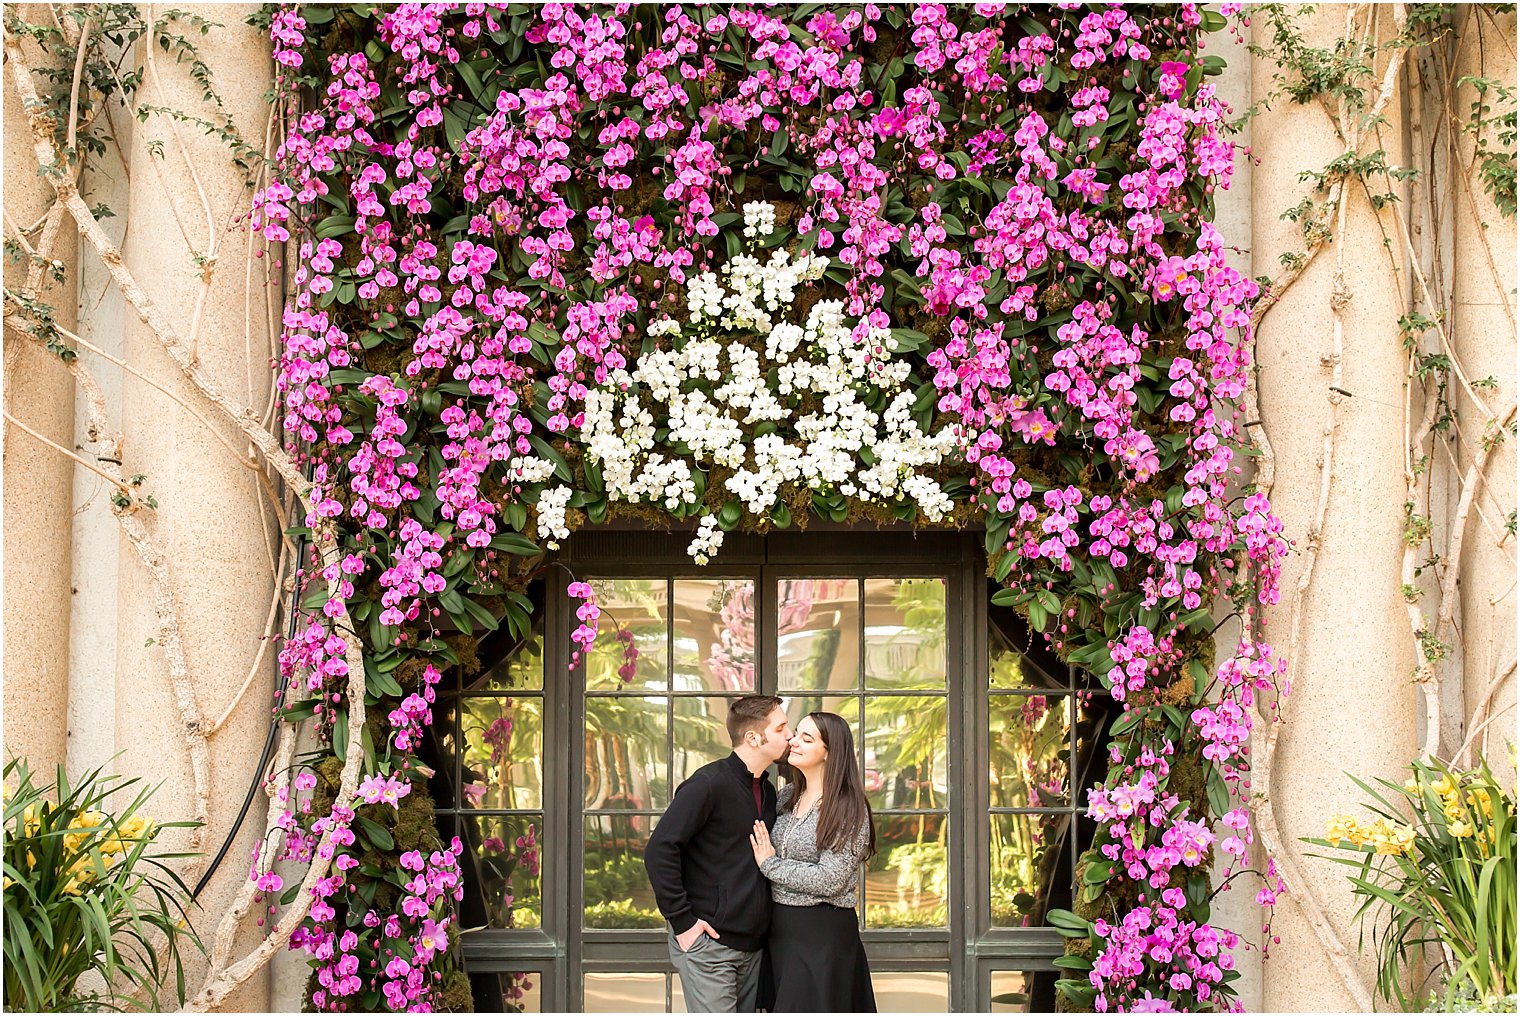 Engagement photo ideas with florals | Photo by Idalia Photography